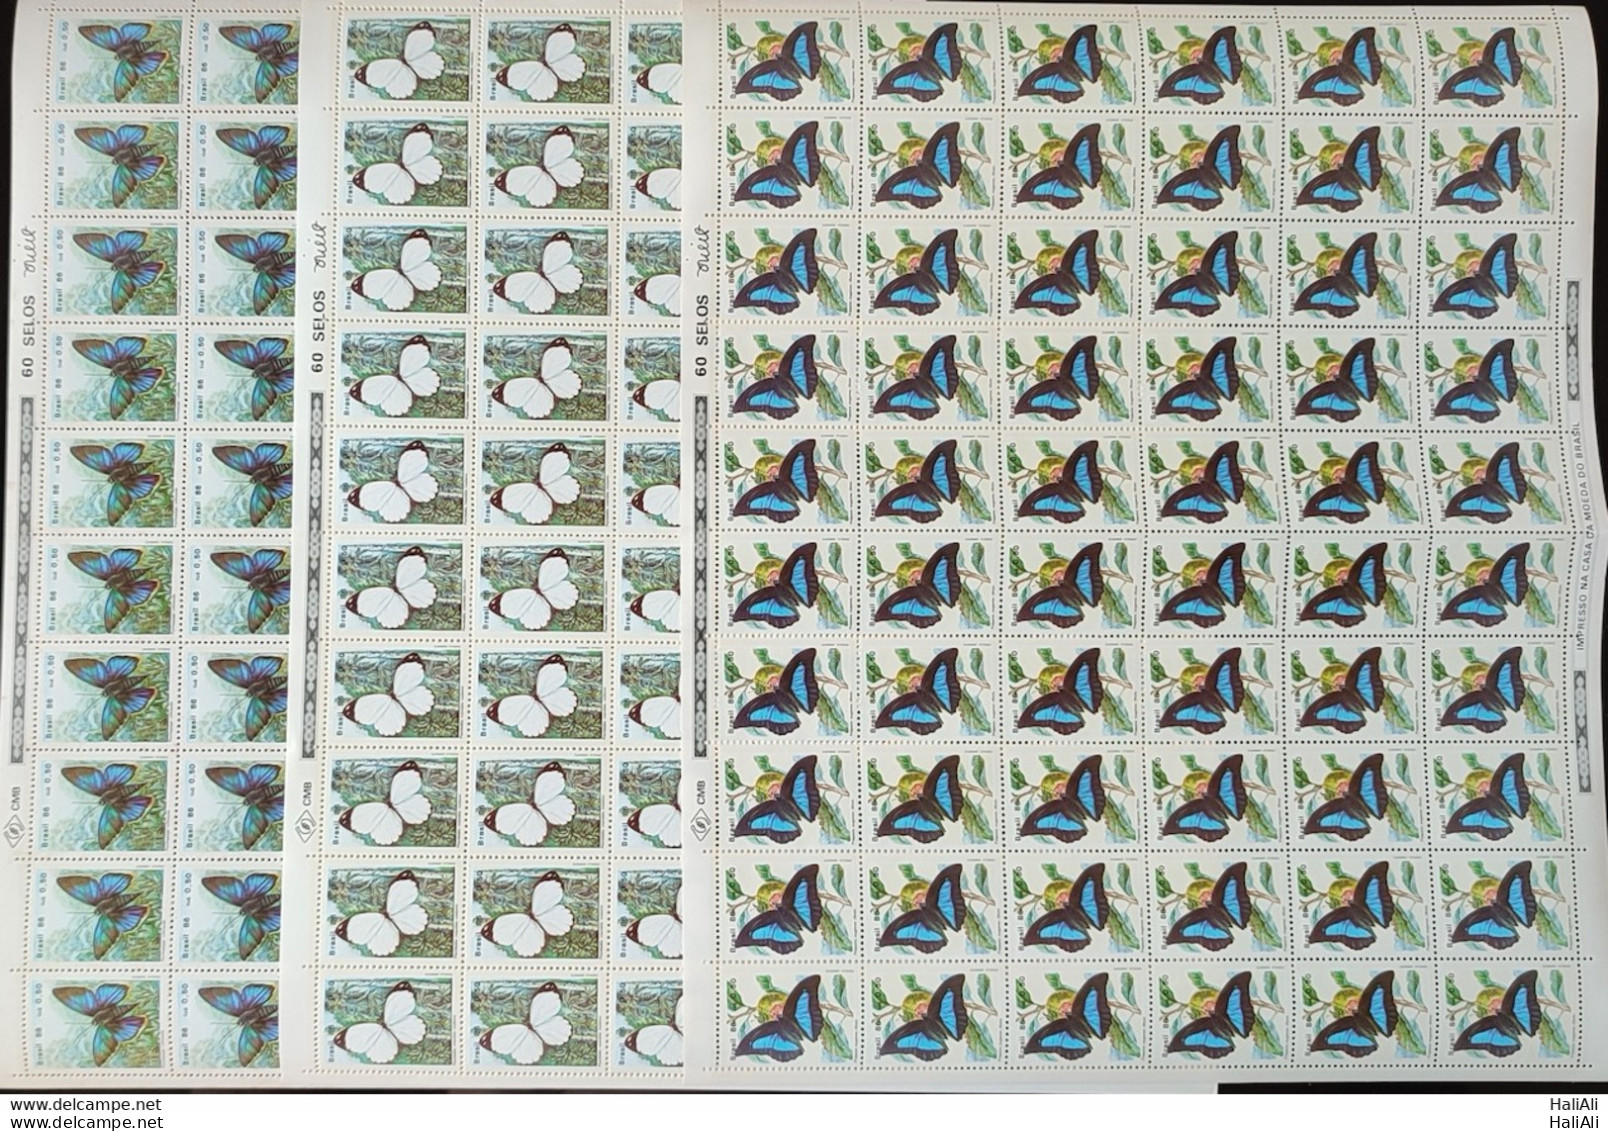 C 1512 Brazil Stamp Butterfly Insects 1986 Sheet Complete Series.jpg - Nuevos